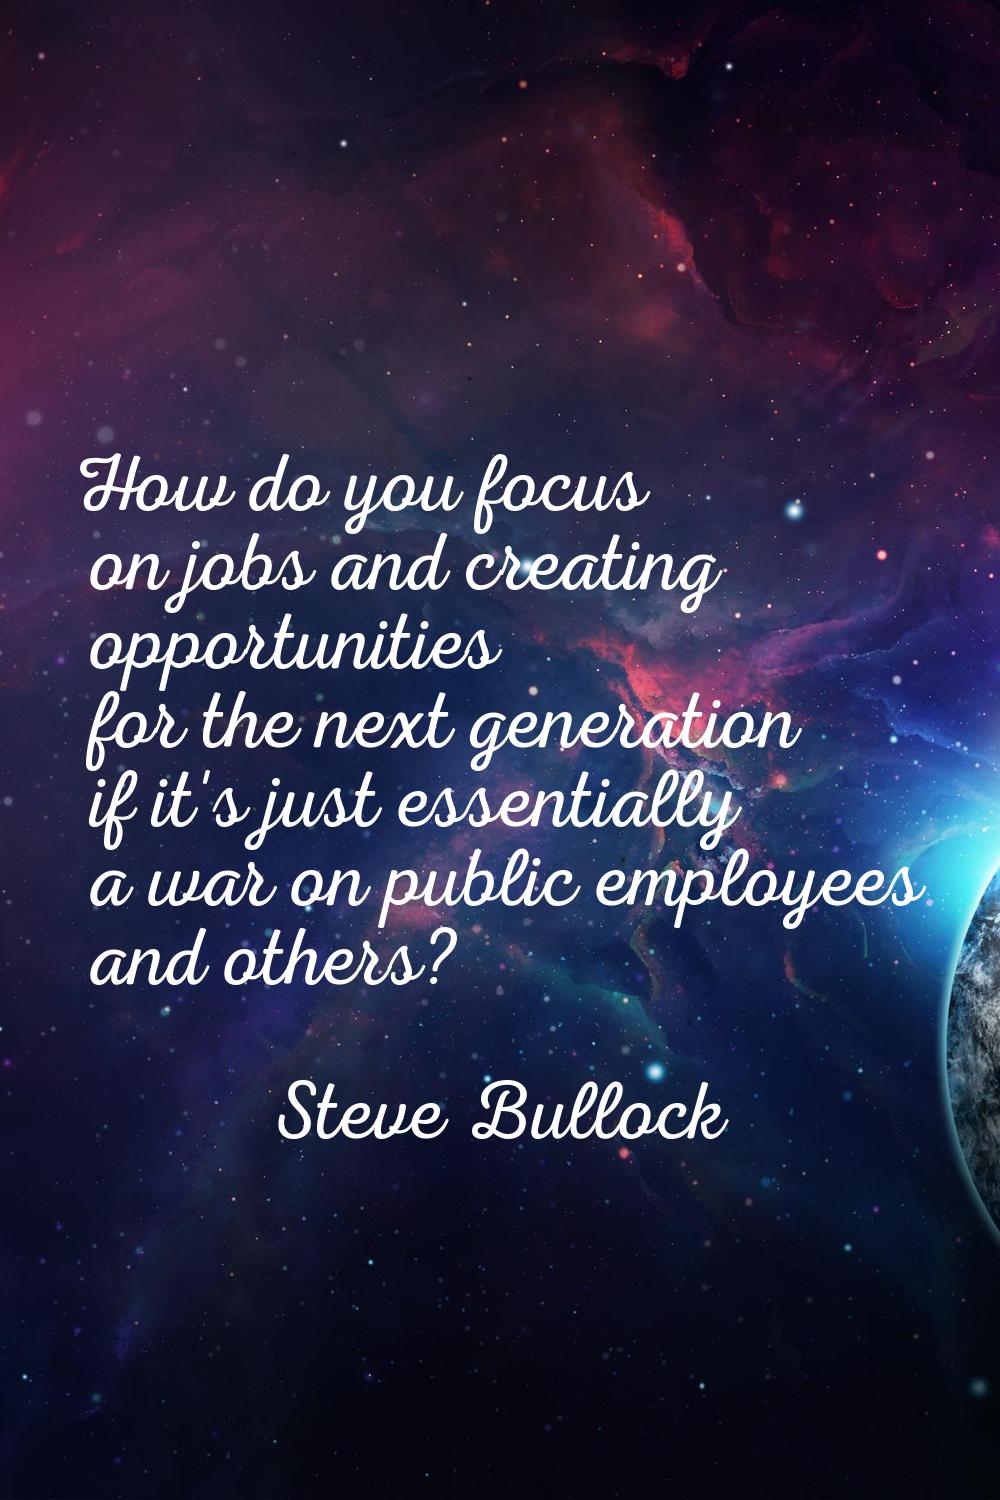 How do you focus on jobs and creating opportunities for the next generation if it's just essentiall